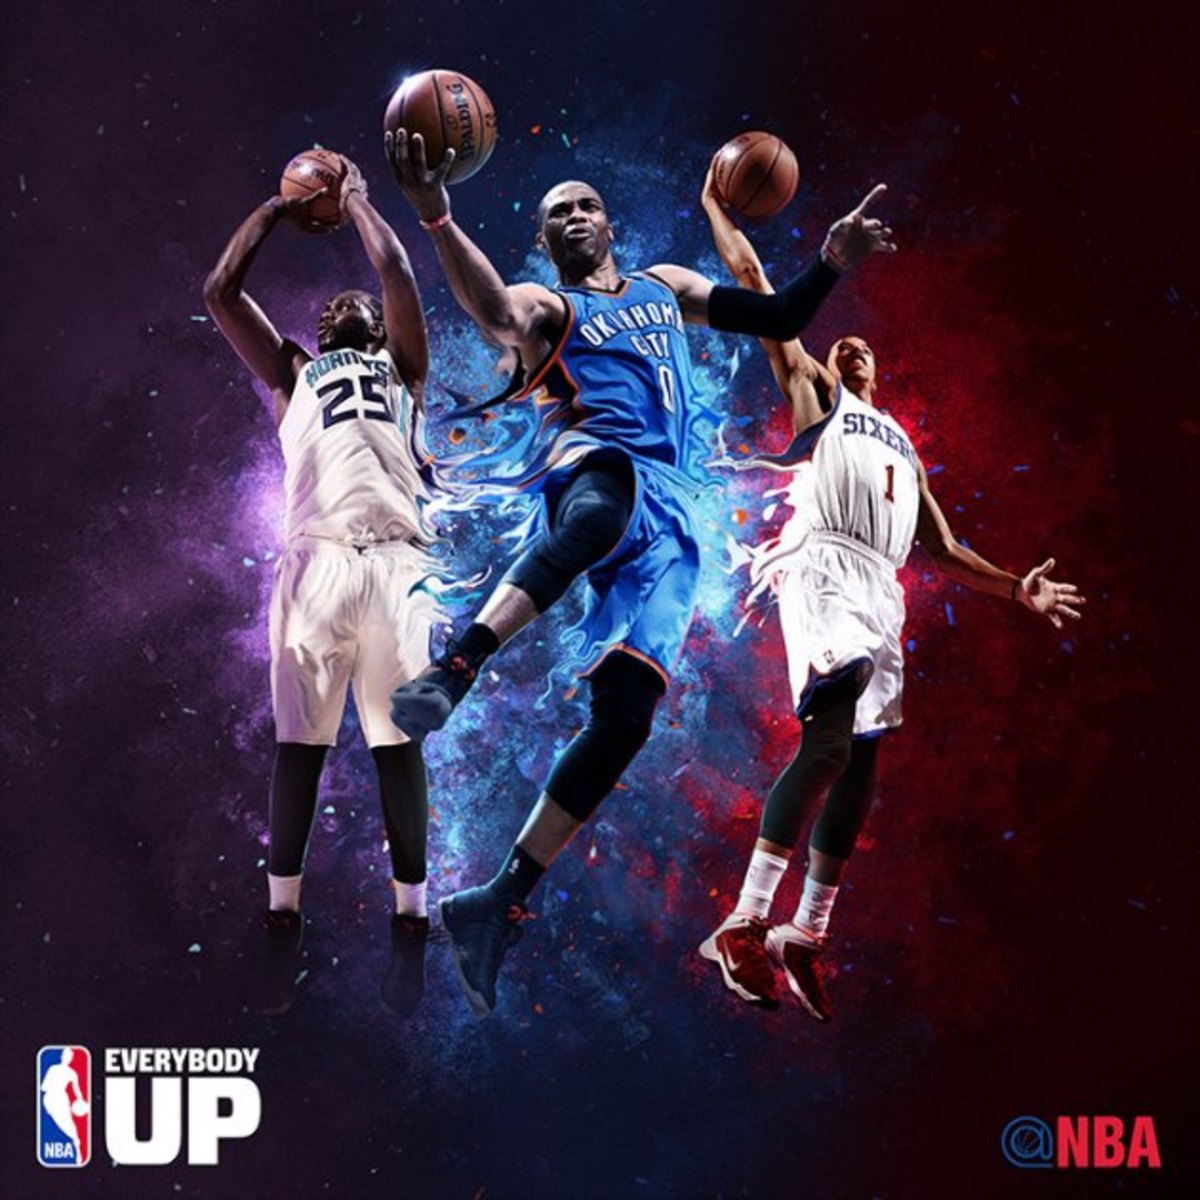 NBA releases new 'Everybody Up' campaign posters Sports Illustrated